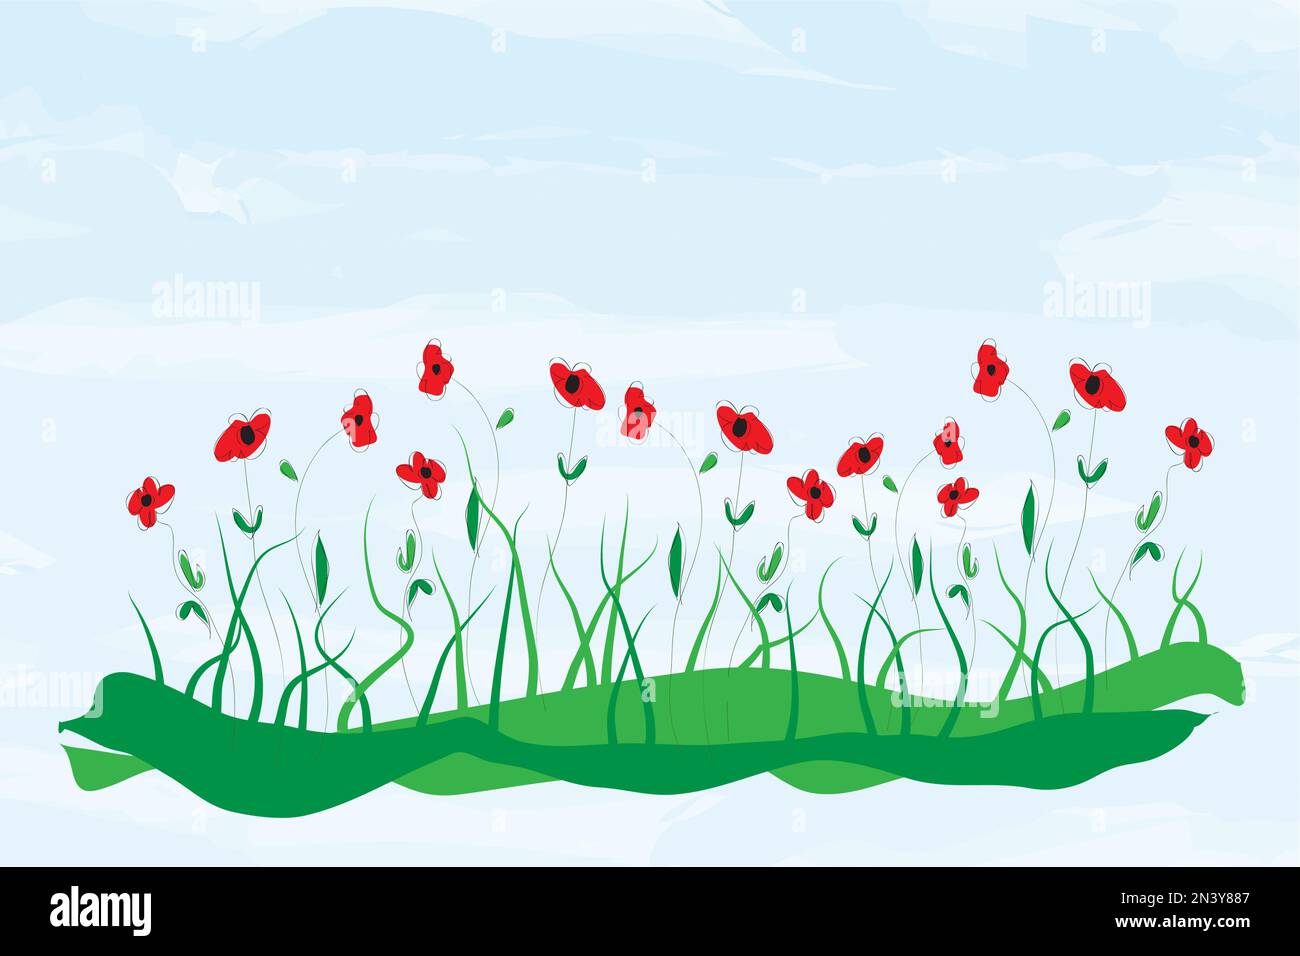 https://c8.alamy.com/comp/2N3Y887/vector-background-spring-poppies-on-the-lawn-childish-drawing-handmade-with-copy-space-2N3Y887.jpg